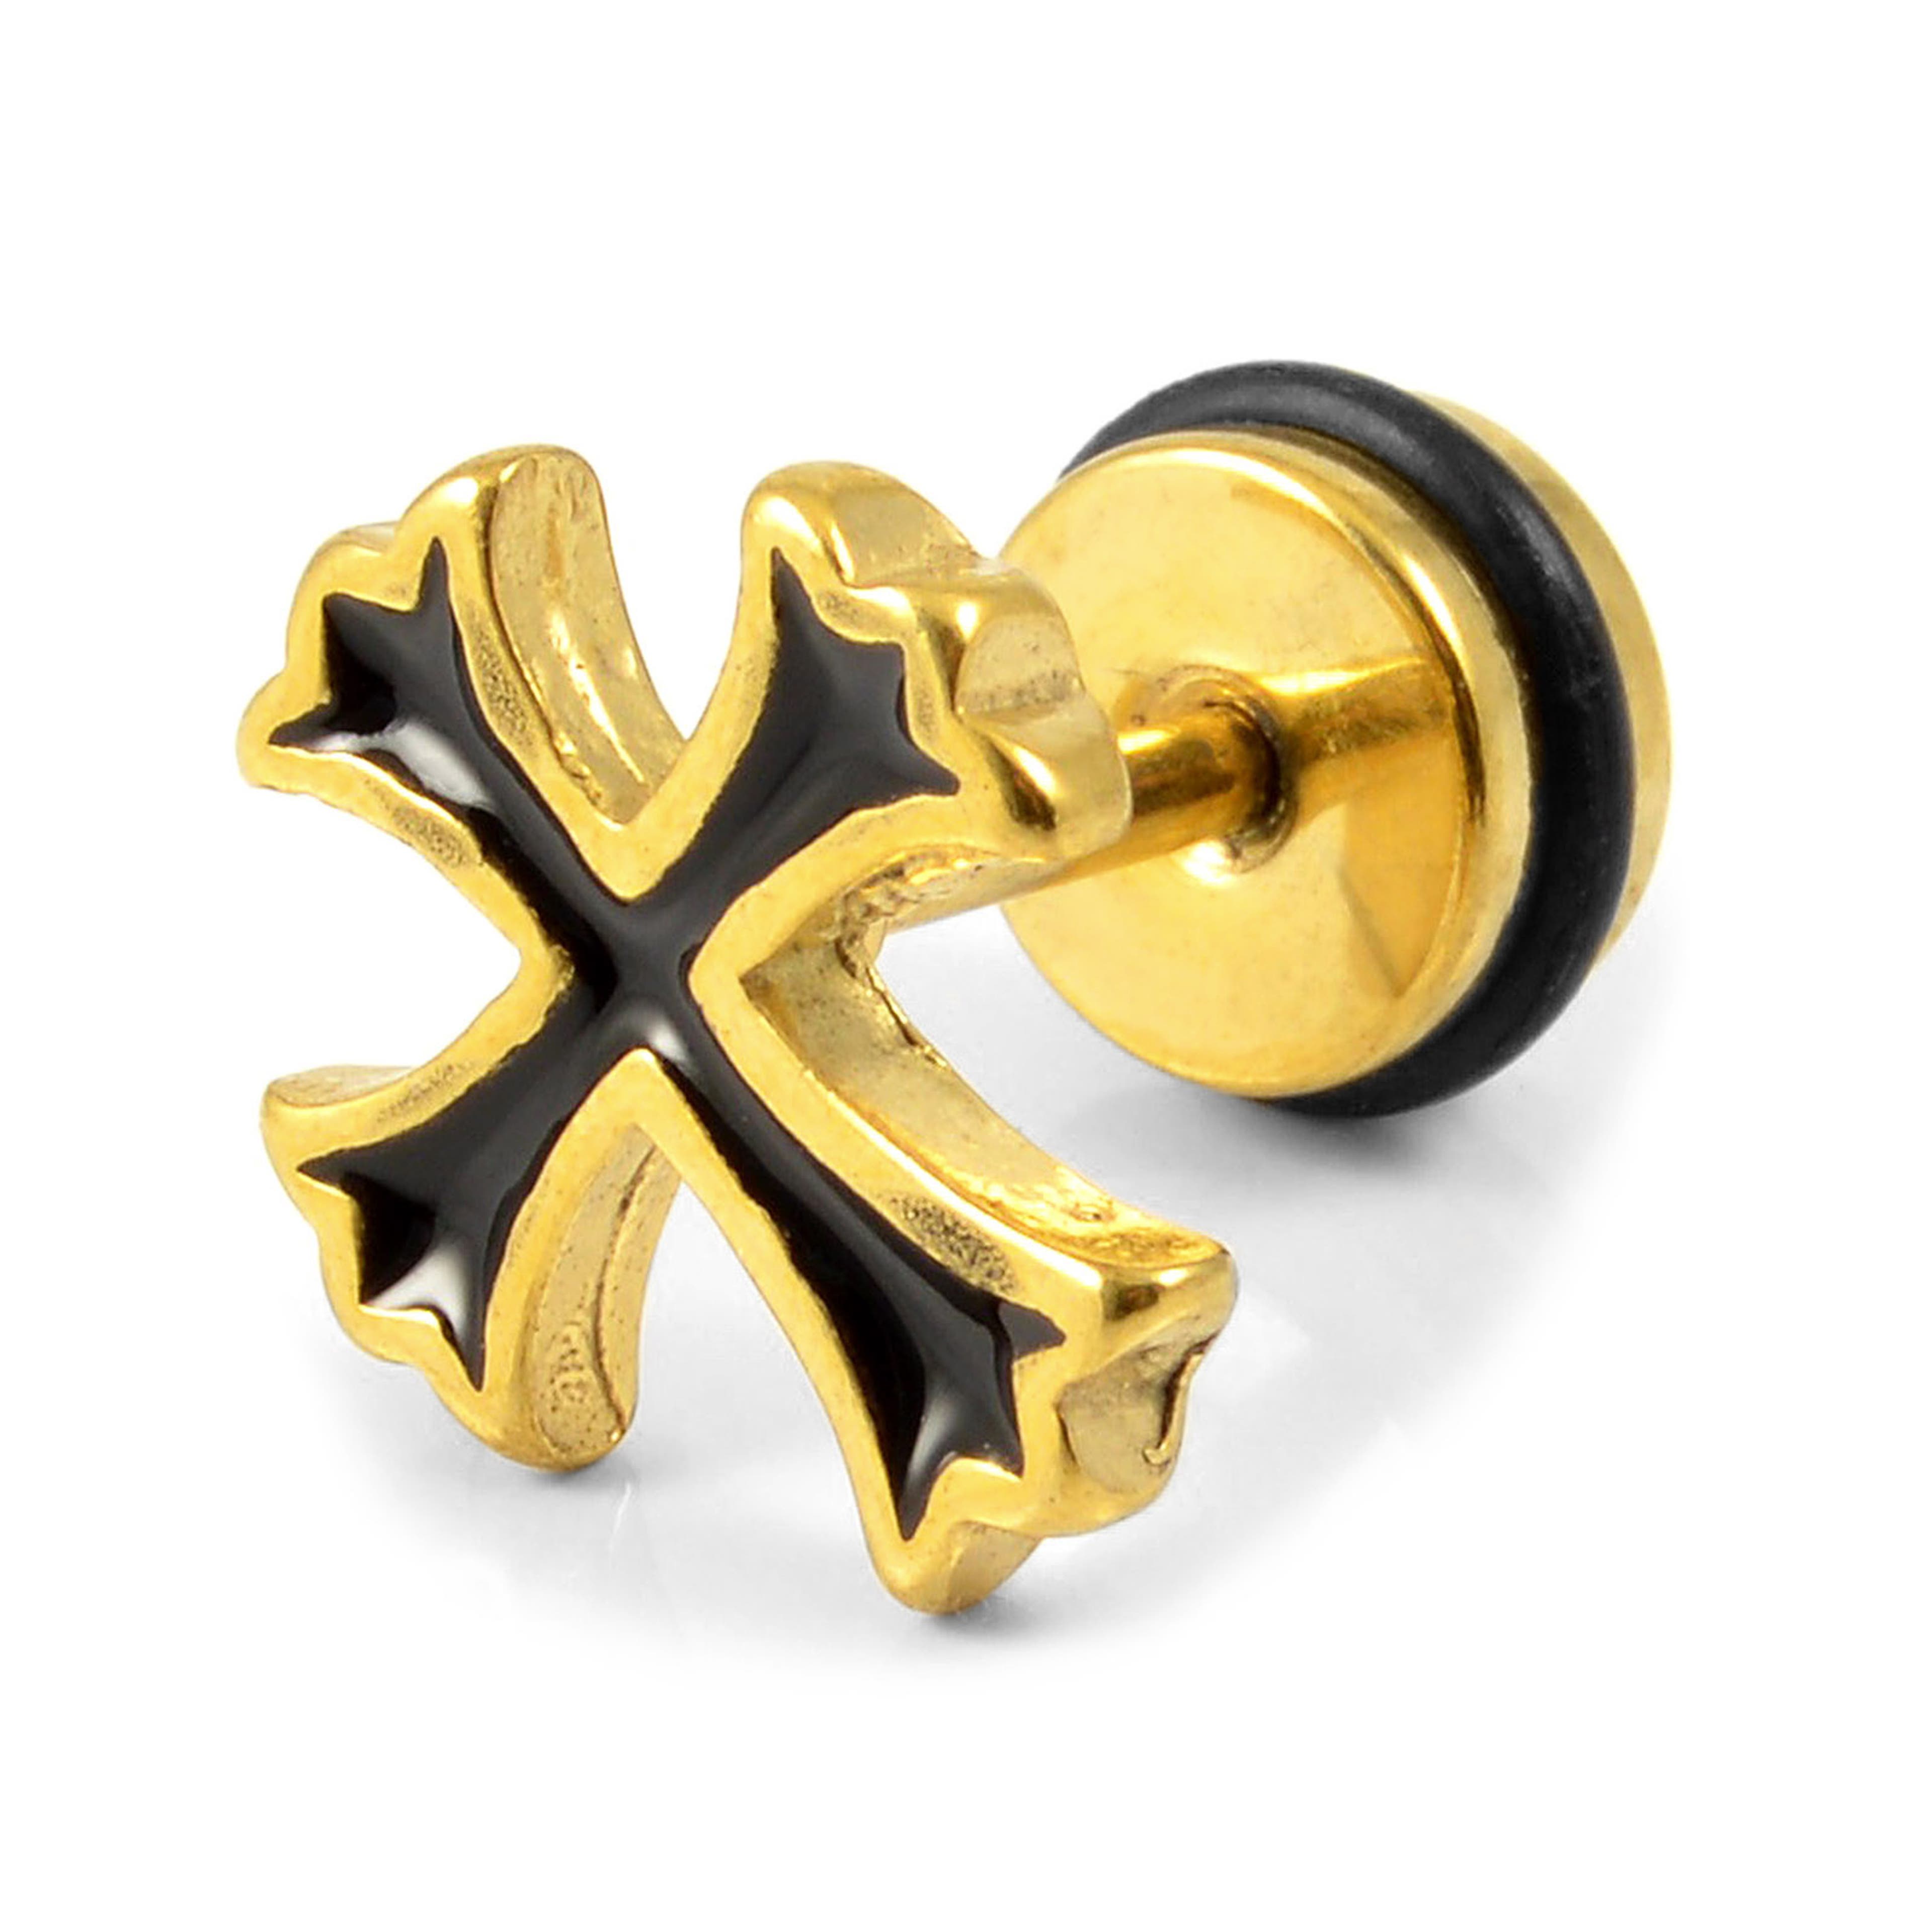 Gold-Tone & Black Stainless Steel Cross Patonce Stud Earring